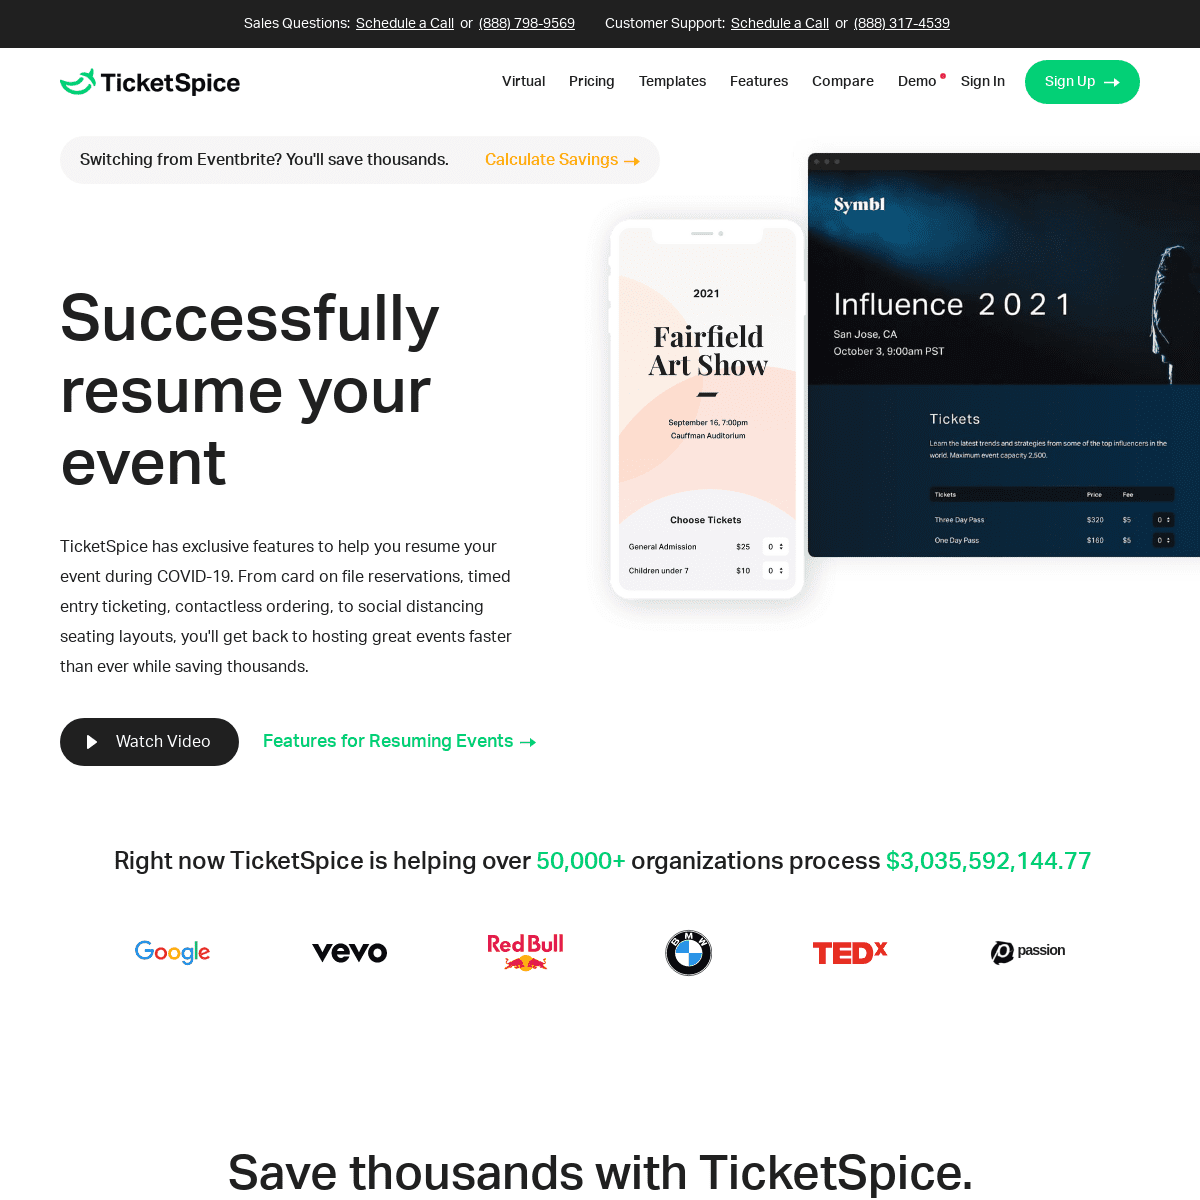 A complete backup of https://ticketspice.com